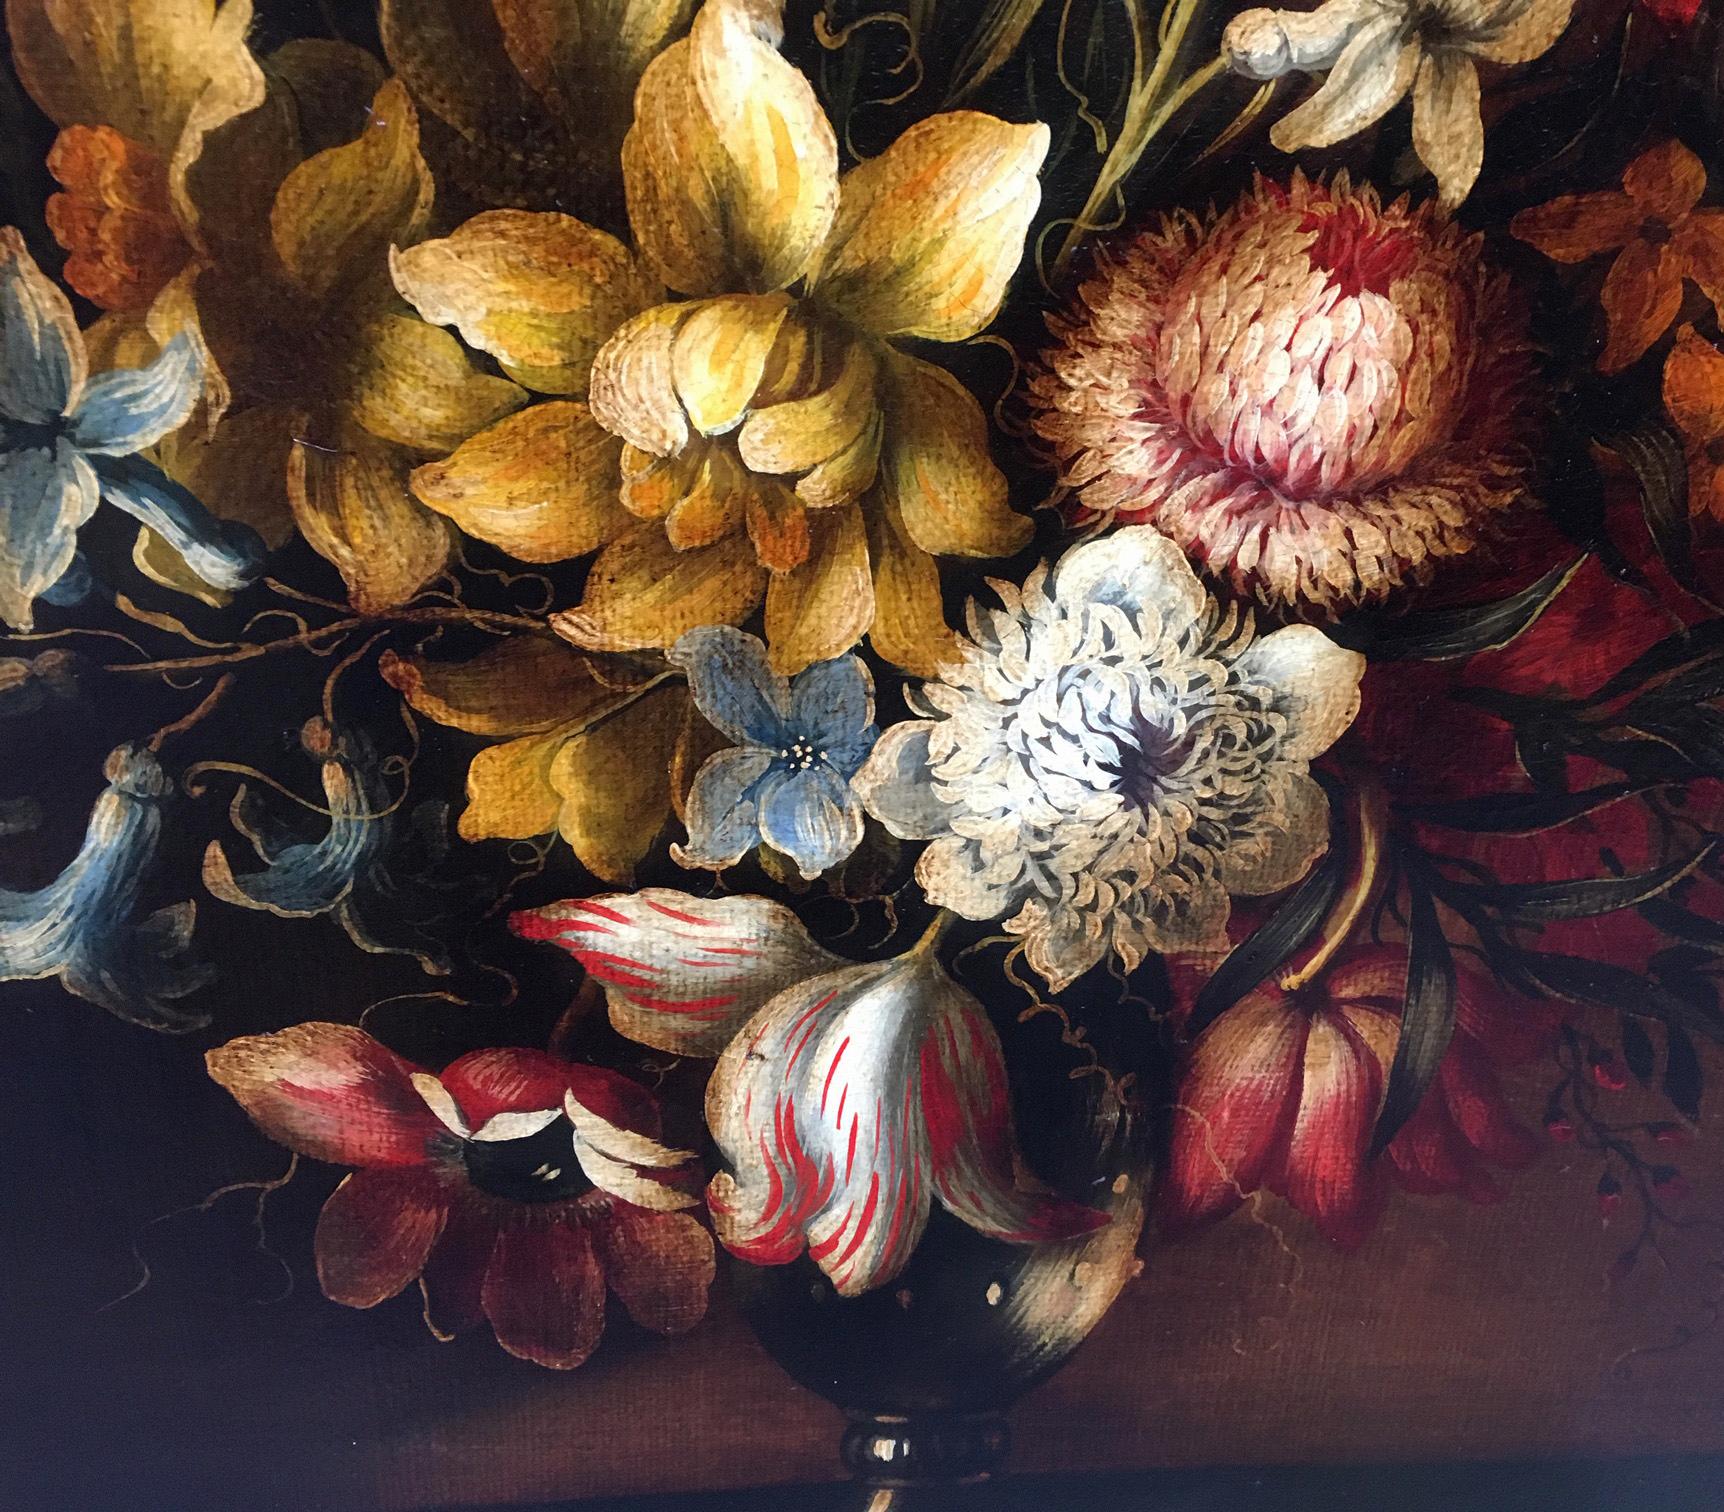 Flowers - Giovanni Perna Italia 2004 - Oil on canvas cm.64x47

In this beautiful oil on canvas Giovanni Perna was inspired by the paintings of the Spanish painter of Dutch origin Juan van der Hamen, famous for his production of still lifes. In